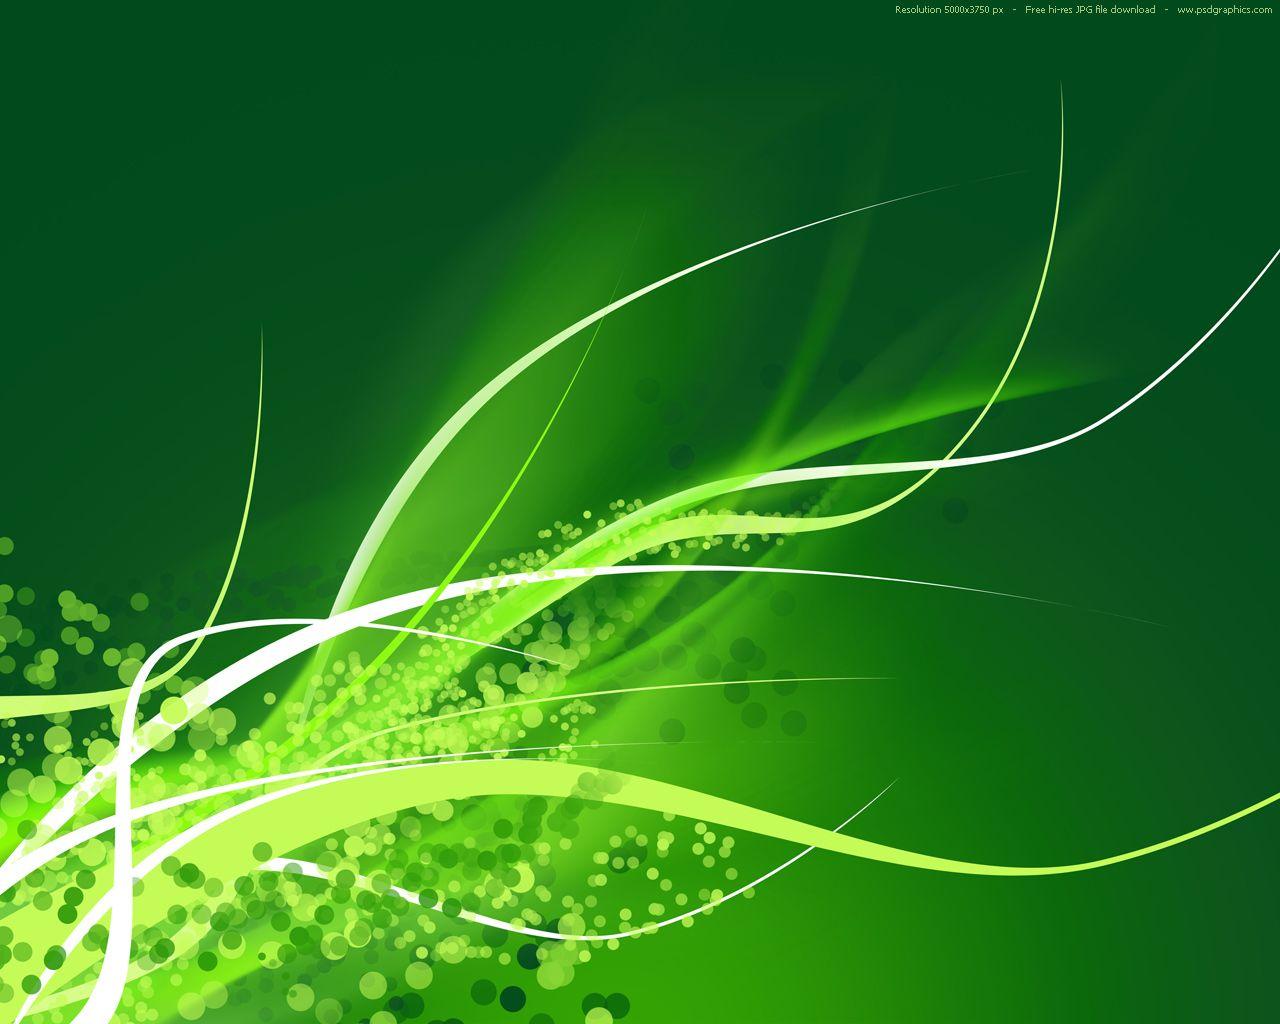 cool green and white backgrounds